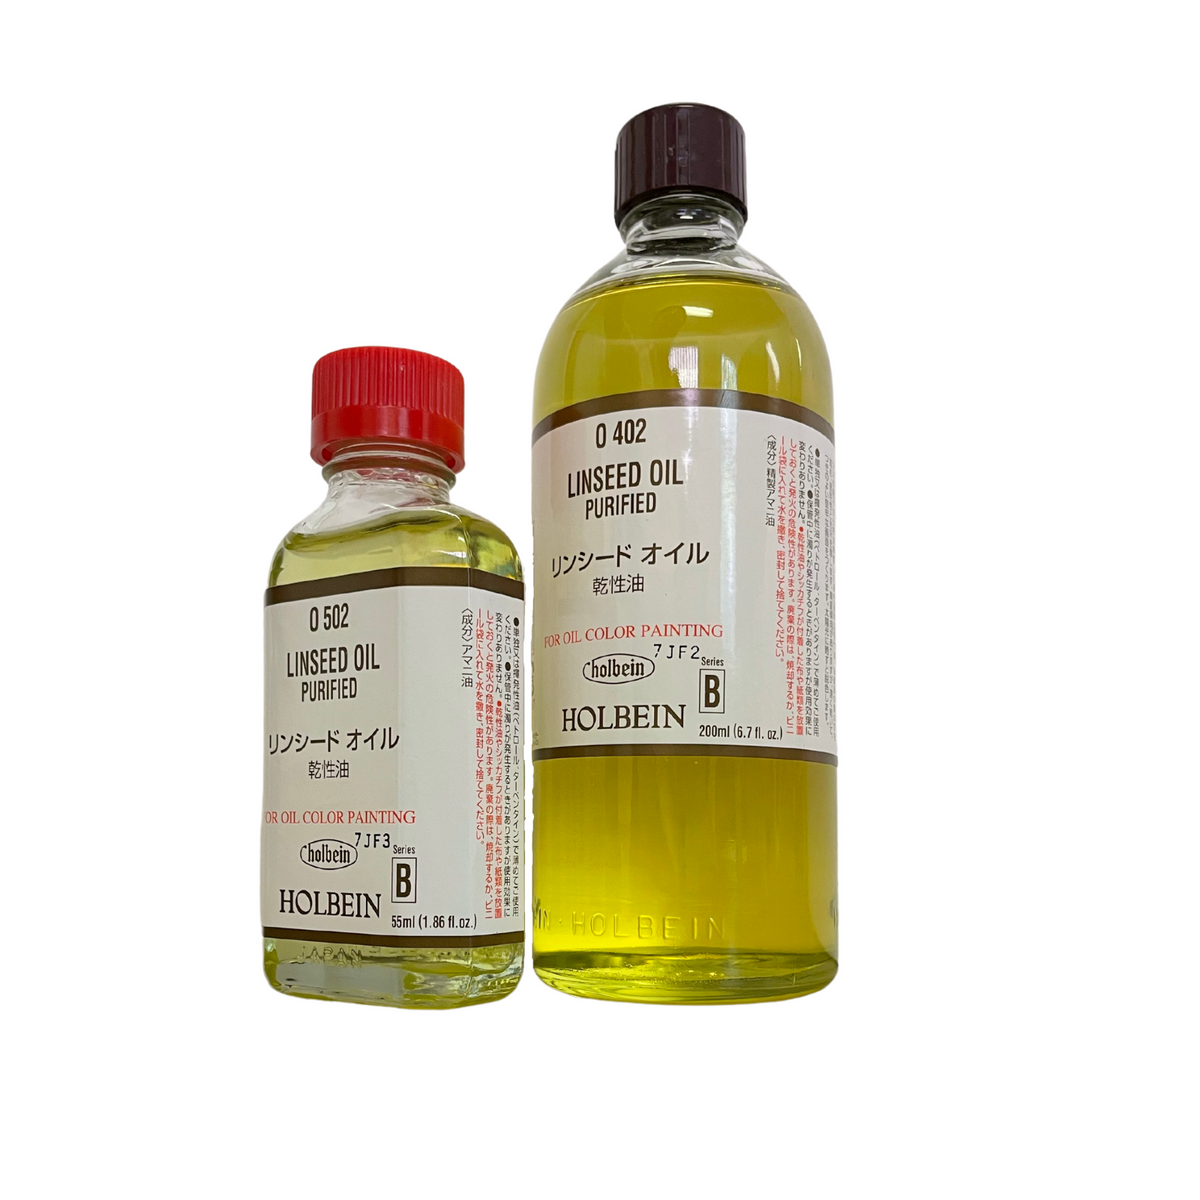 Holbein Linseed Oil- Purified 55 ml